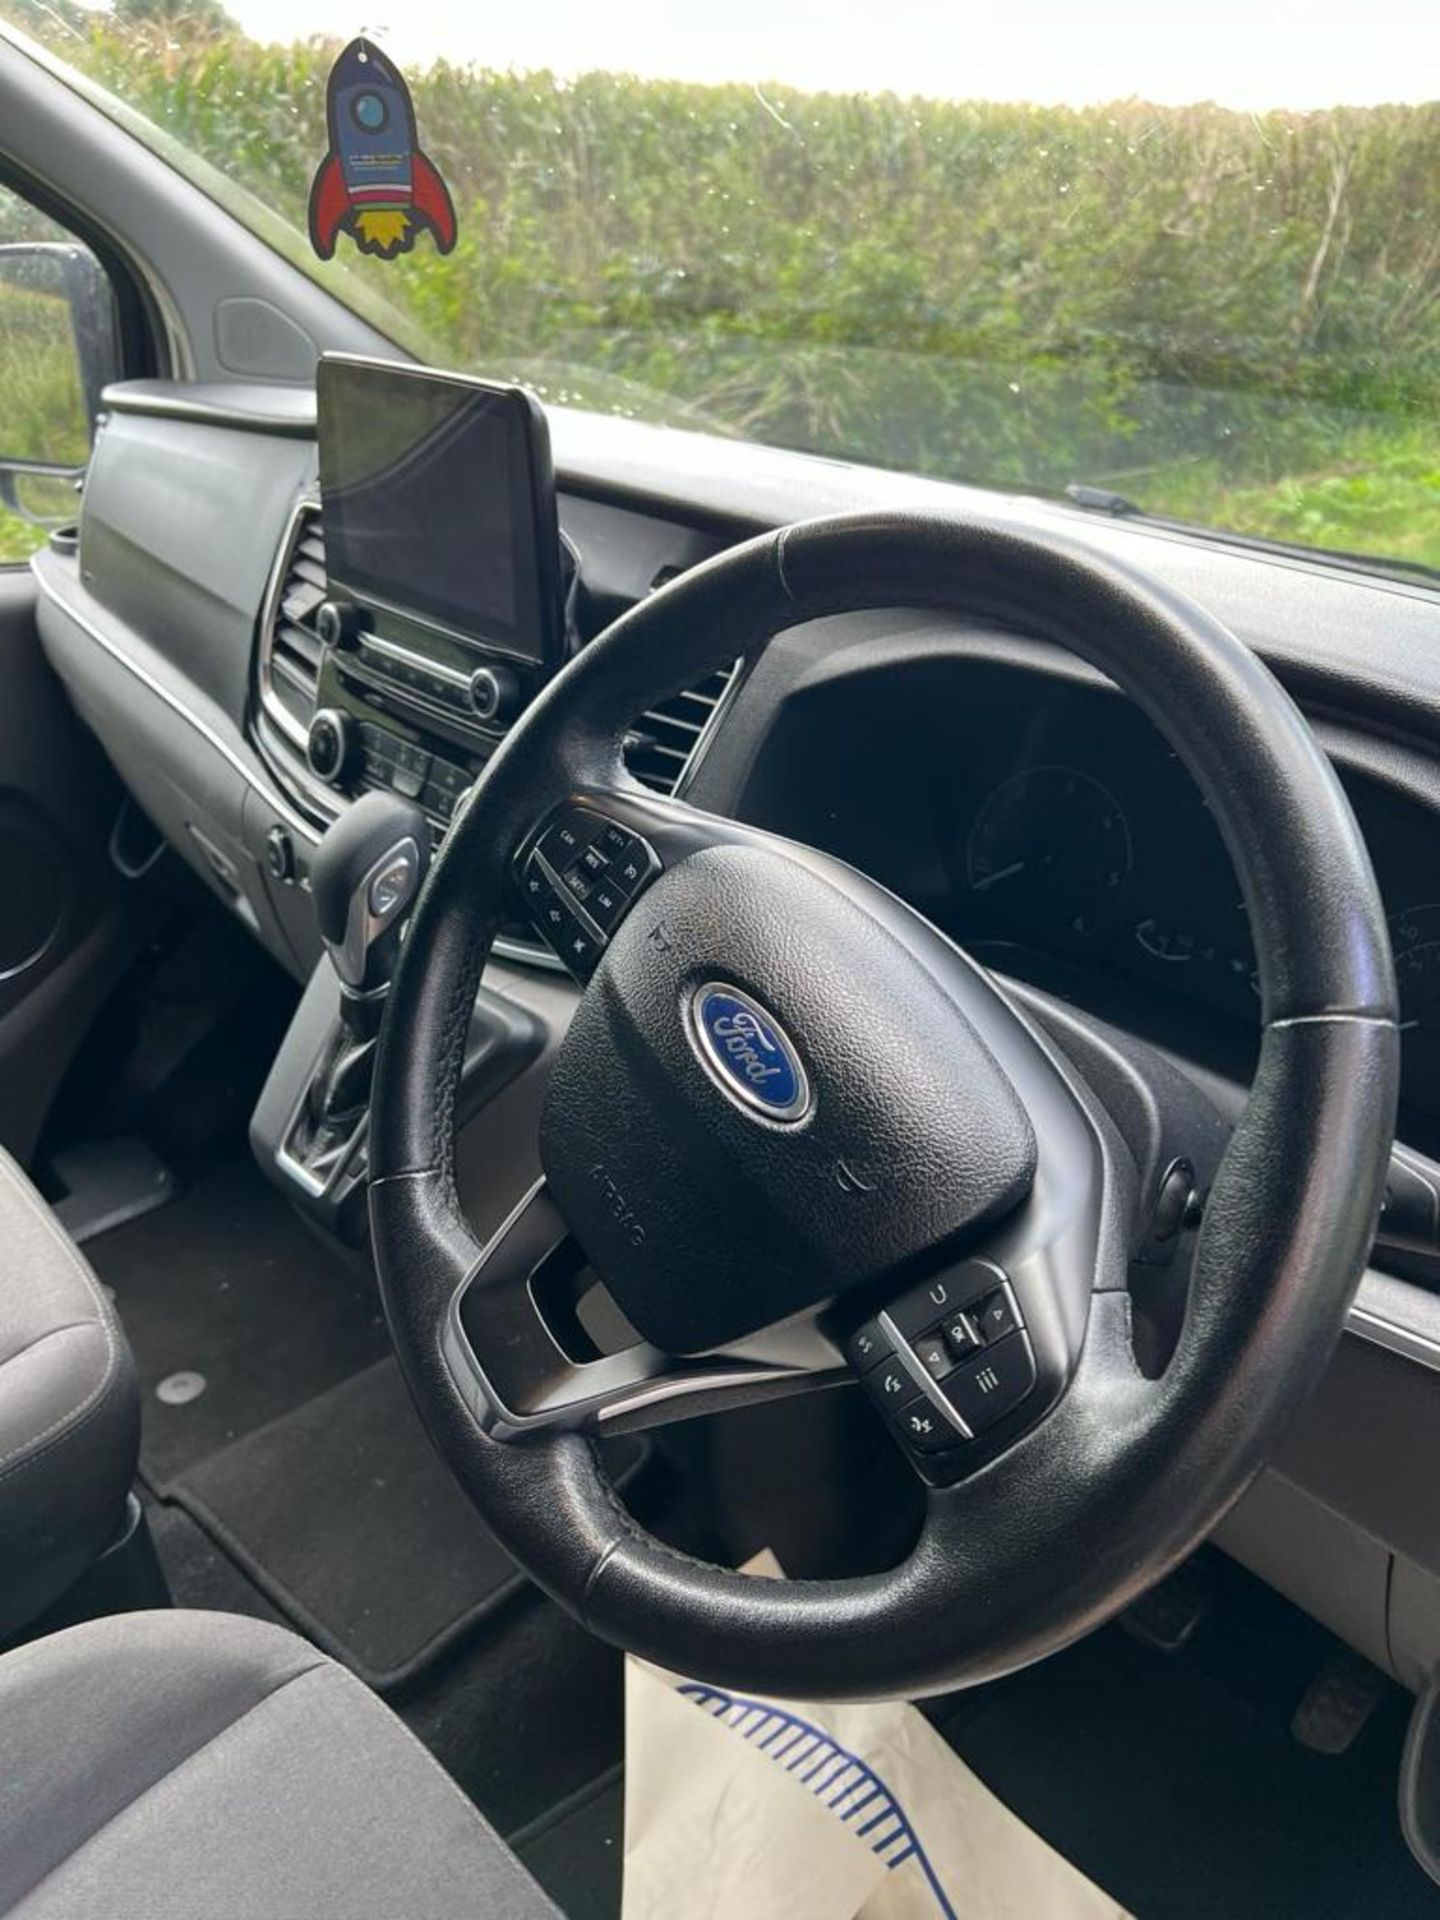 2019 FORD INDEPENDENCE RS AUTO BLACK WAV TOURNEO *NO VAT* - Image 22 of 50